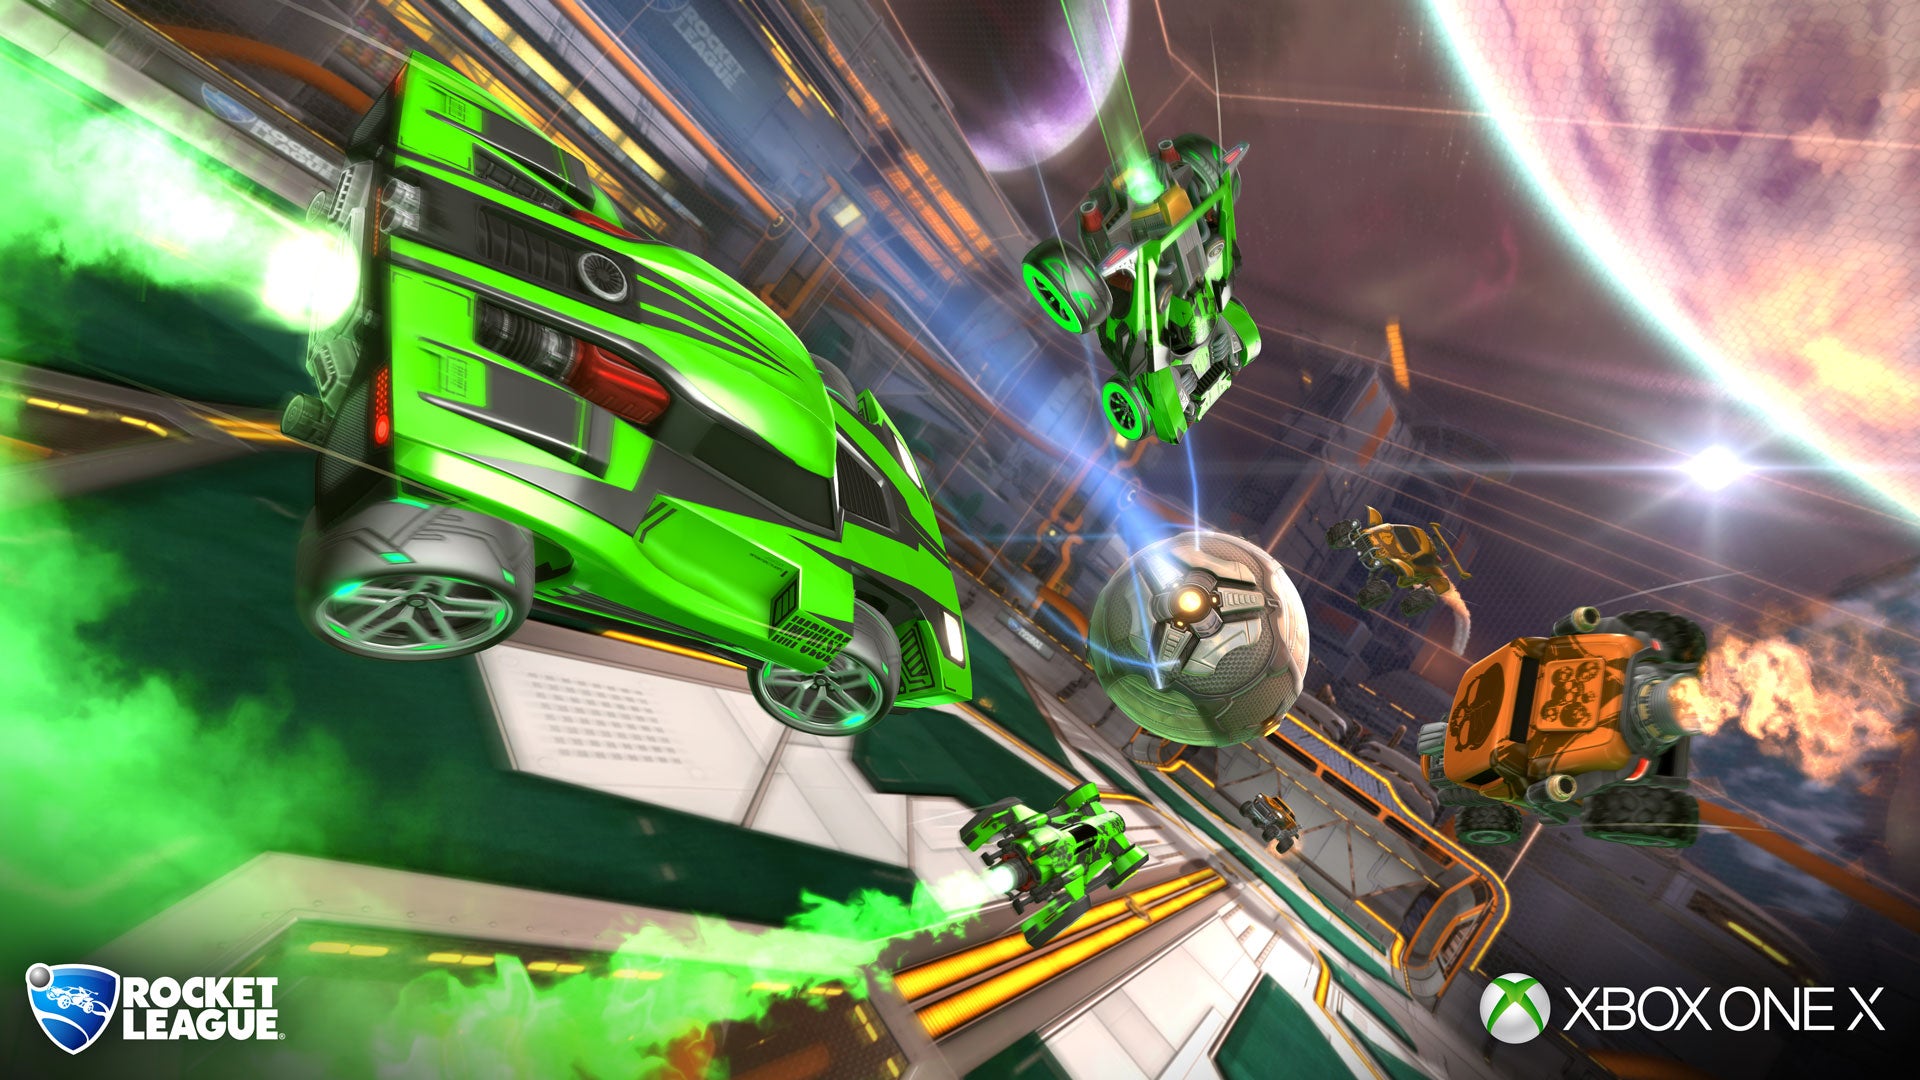 Image for Rocket League December update includes enhanced Xbox One X support